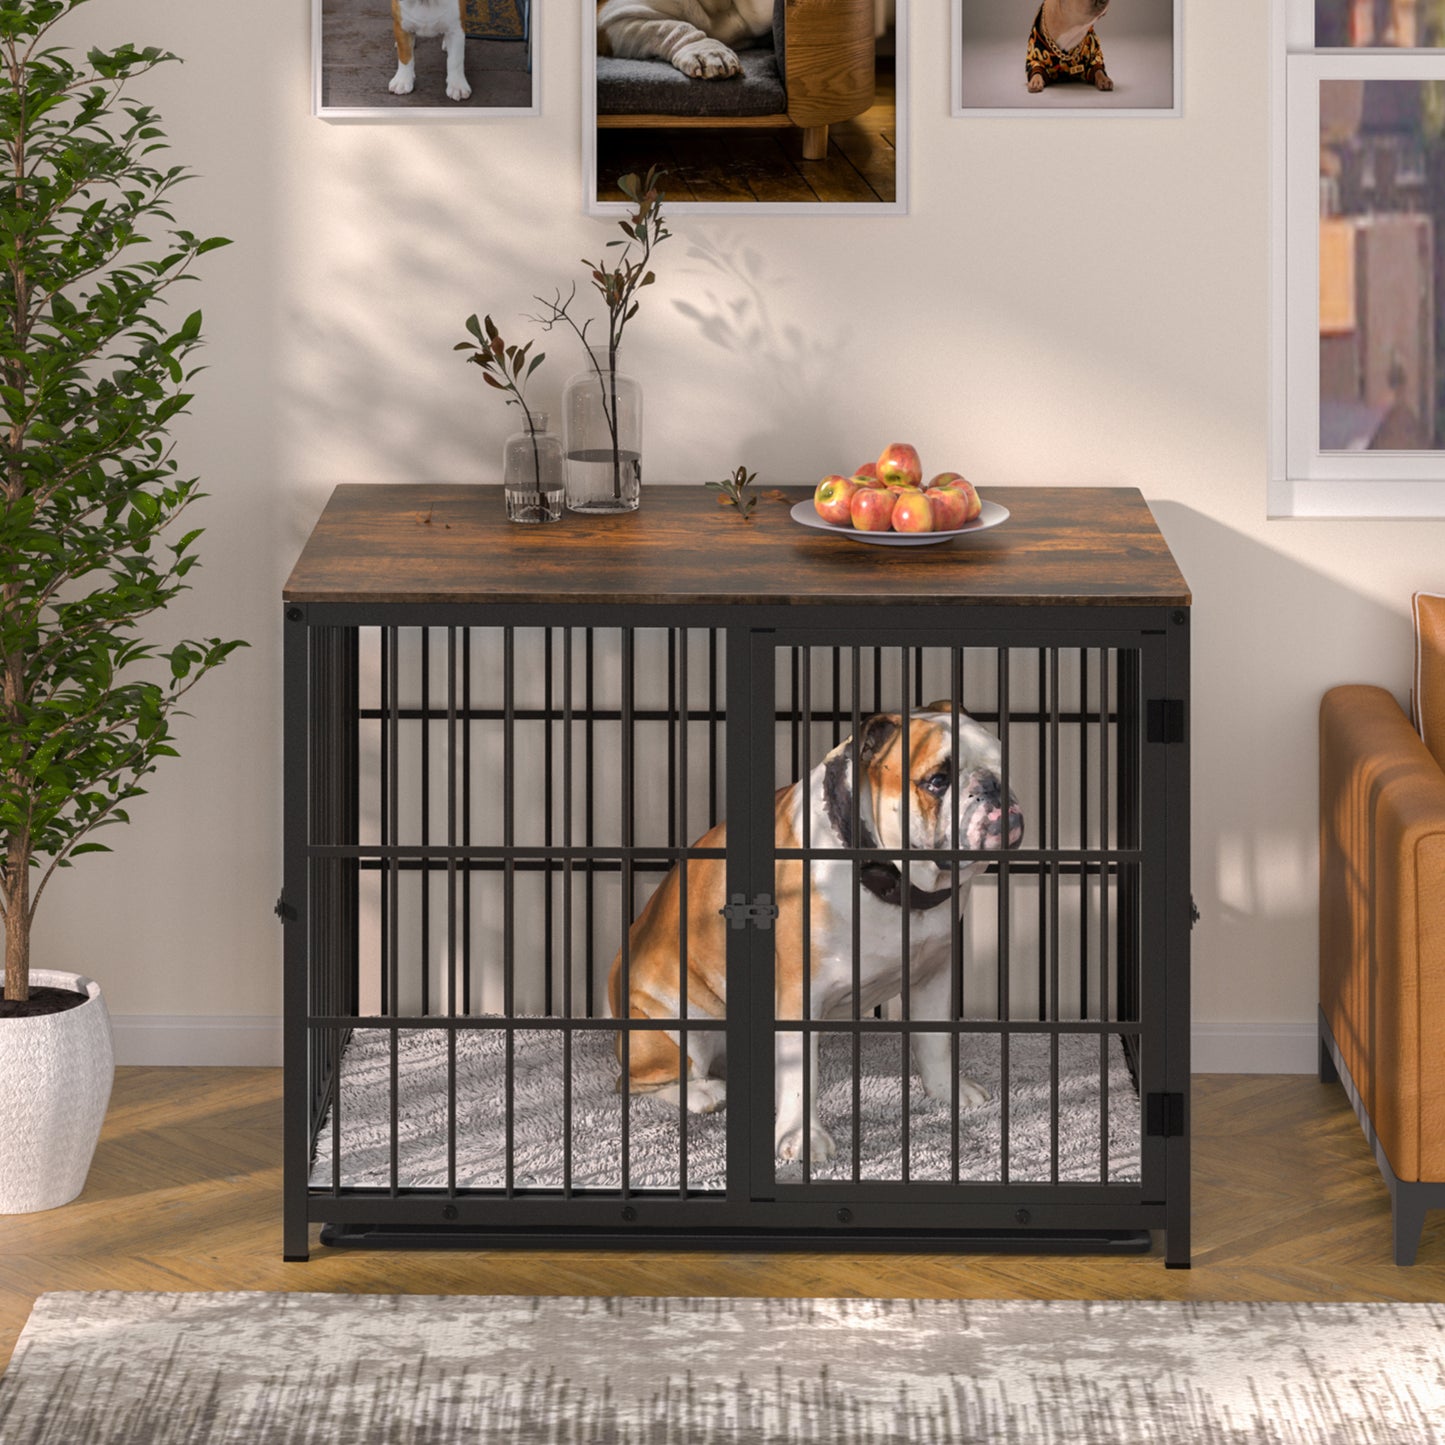 BINGOPAW Furniture Style Wooden Dog Crate Pet Kennel End Table with Three Doors and Tray